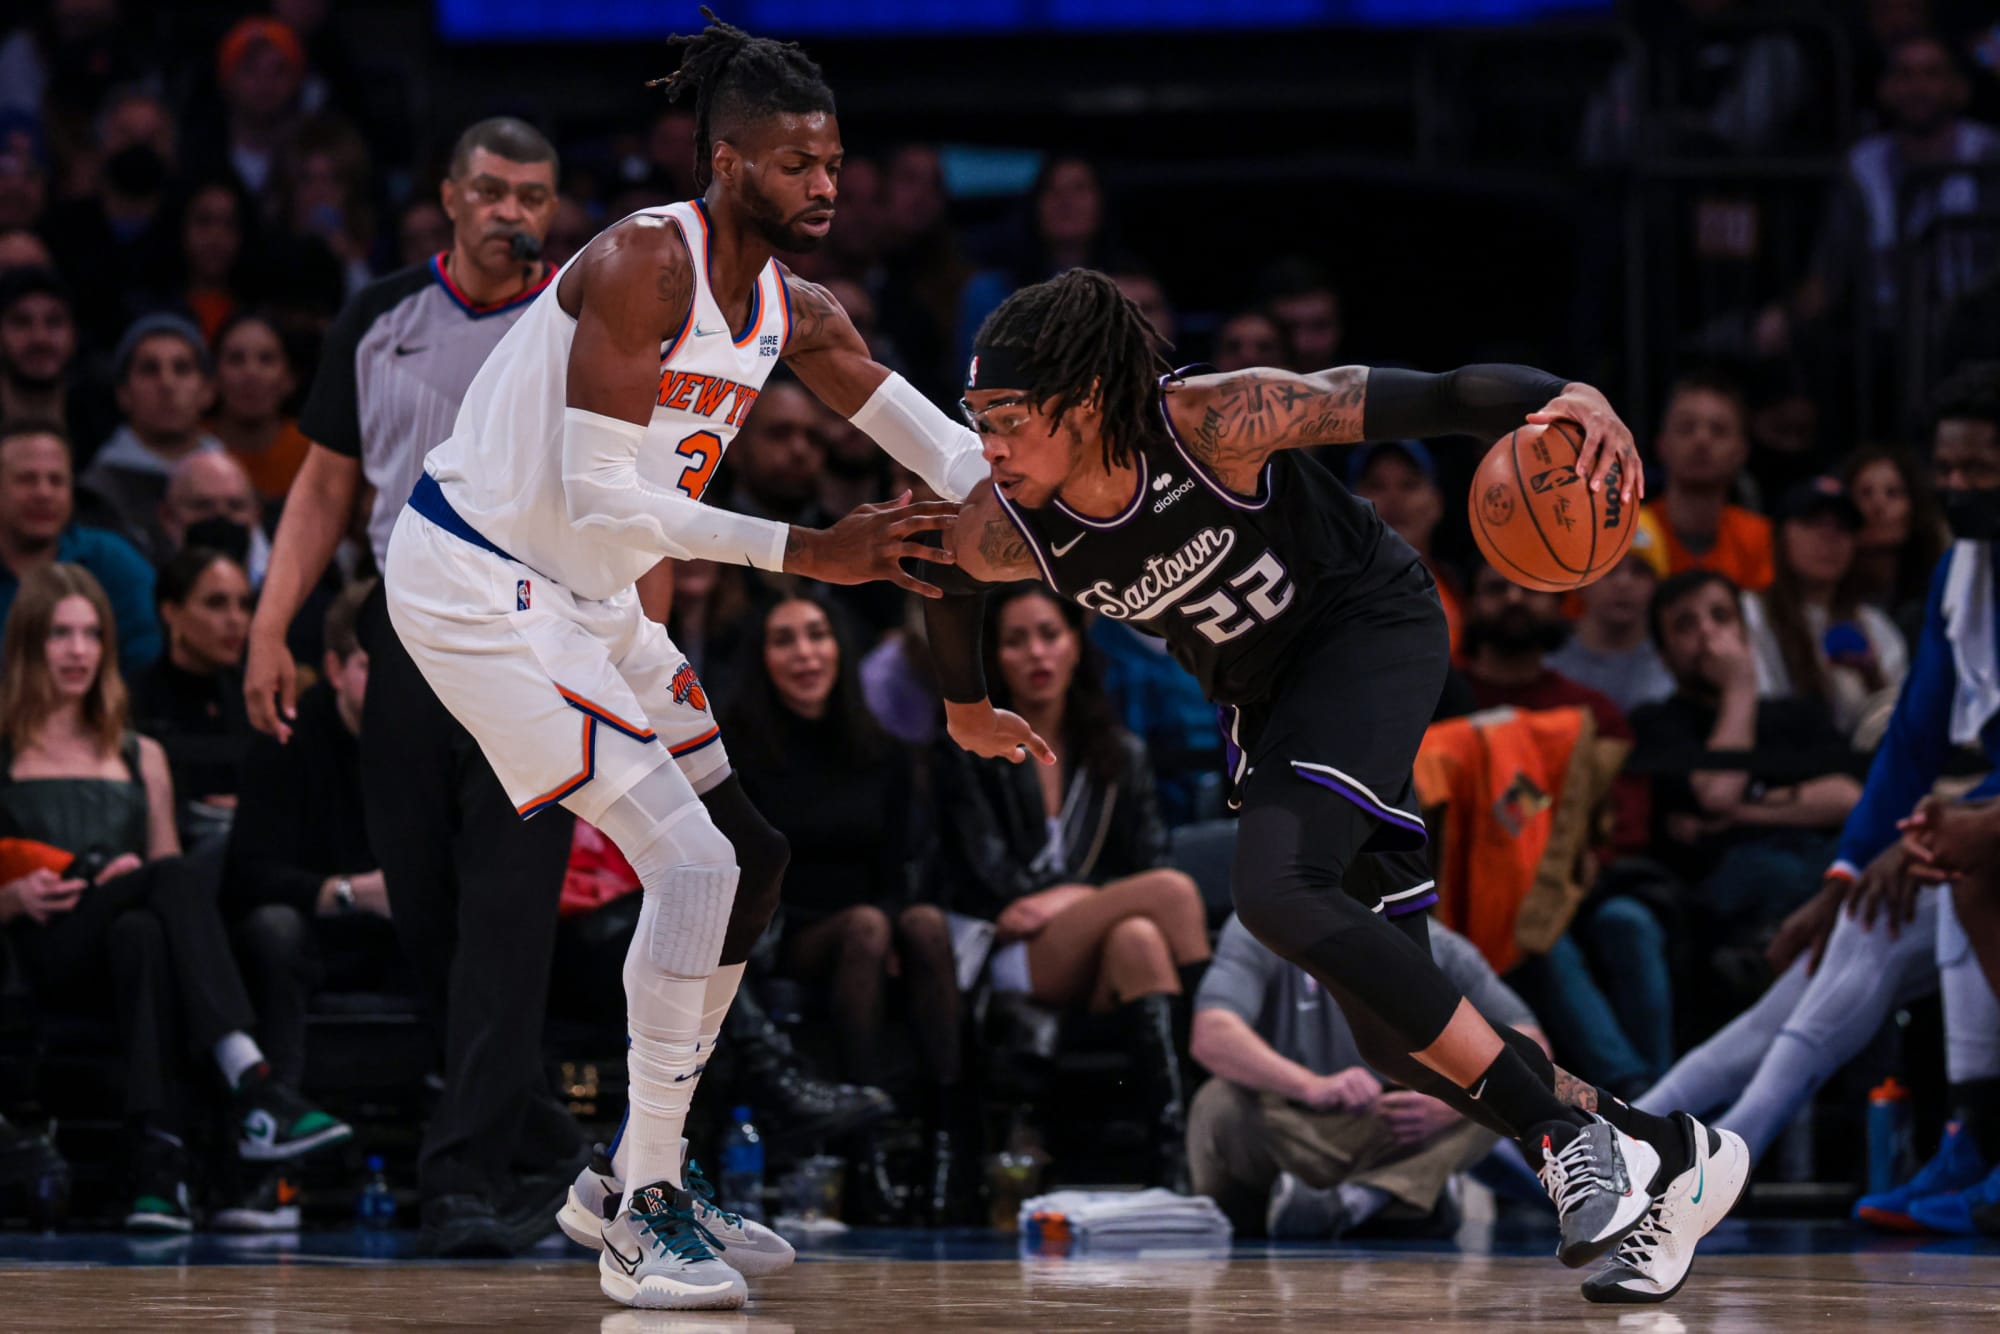 Reaction: The Sacramento Kings have waived Nerlens Noel and